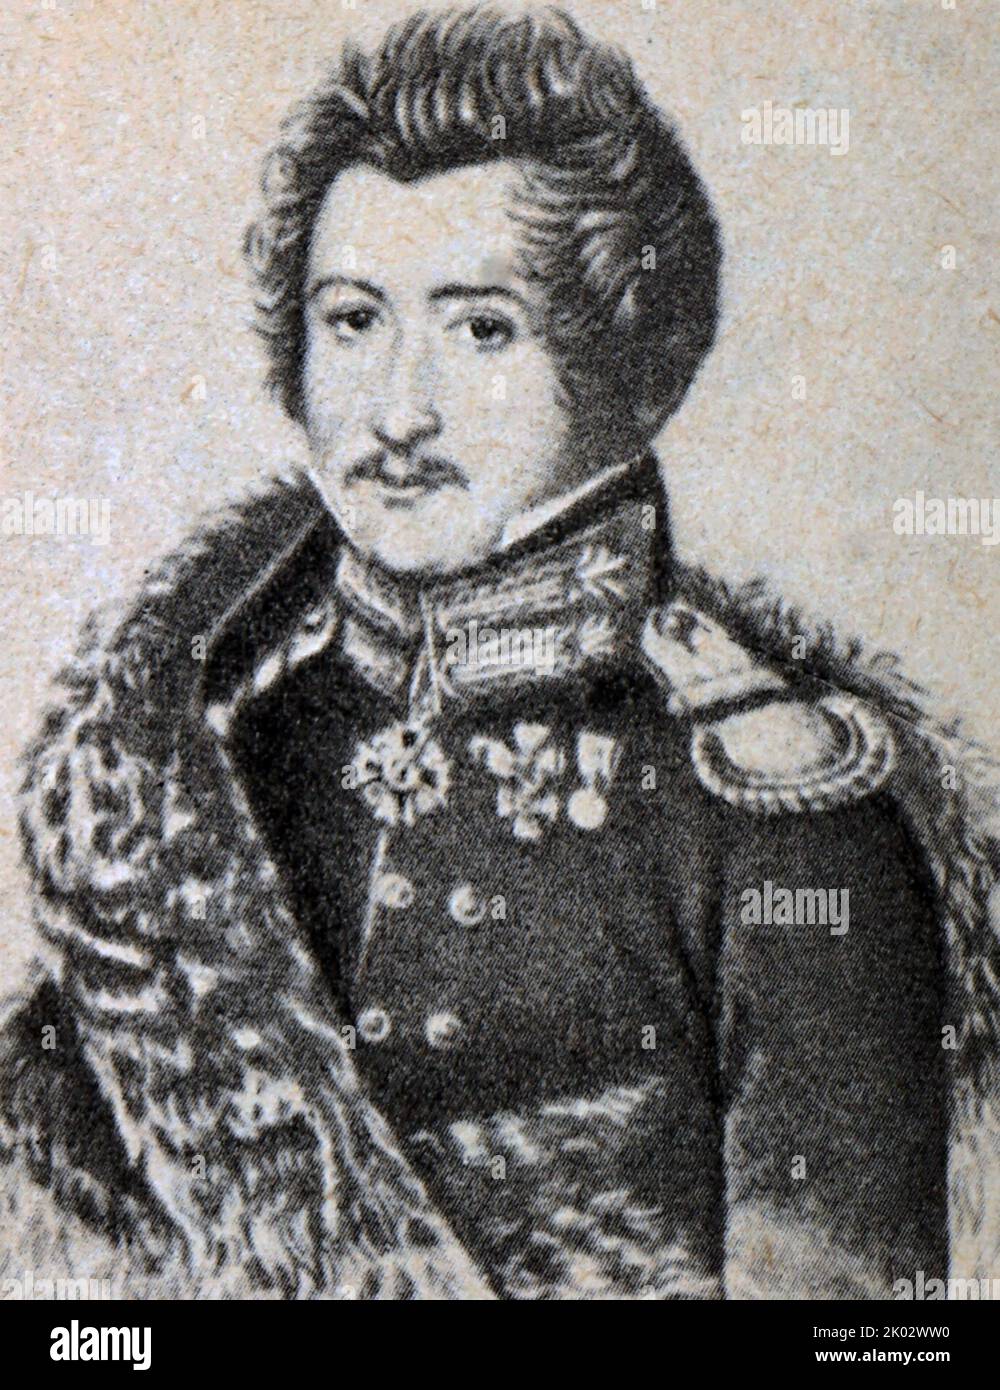 Sergei Muraviev Apostol. He was a Russian Imperial Lieutenant Colonel and one of the organizers of the Decembrist revolt. He was one of five Decembrists executed for their roles in attempting to reform the Russian autocracy towards a constitutional form of government. Stock Photo